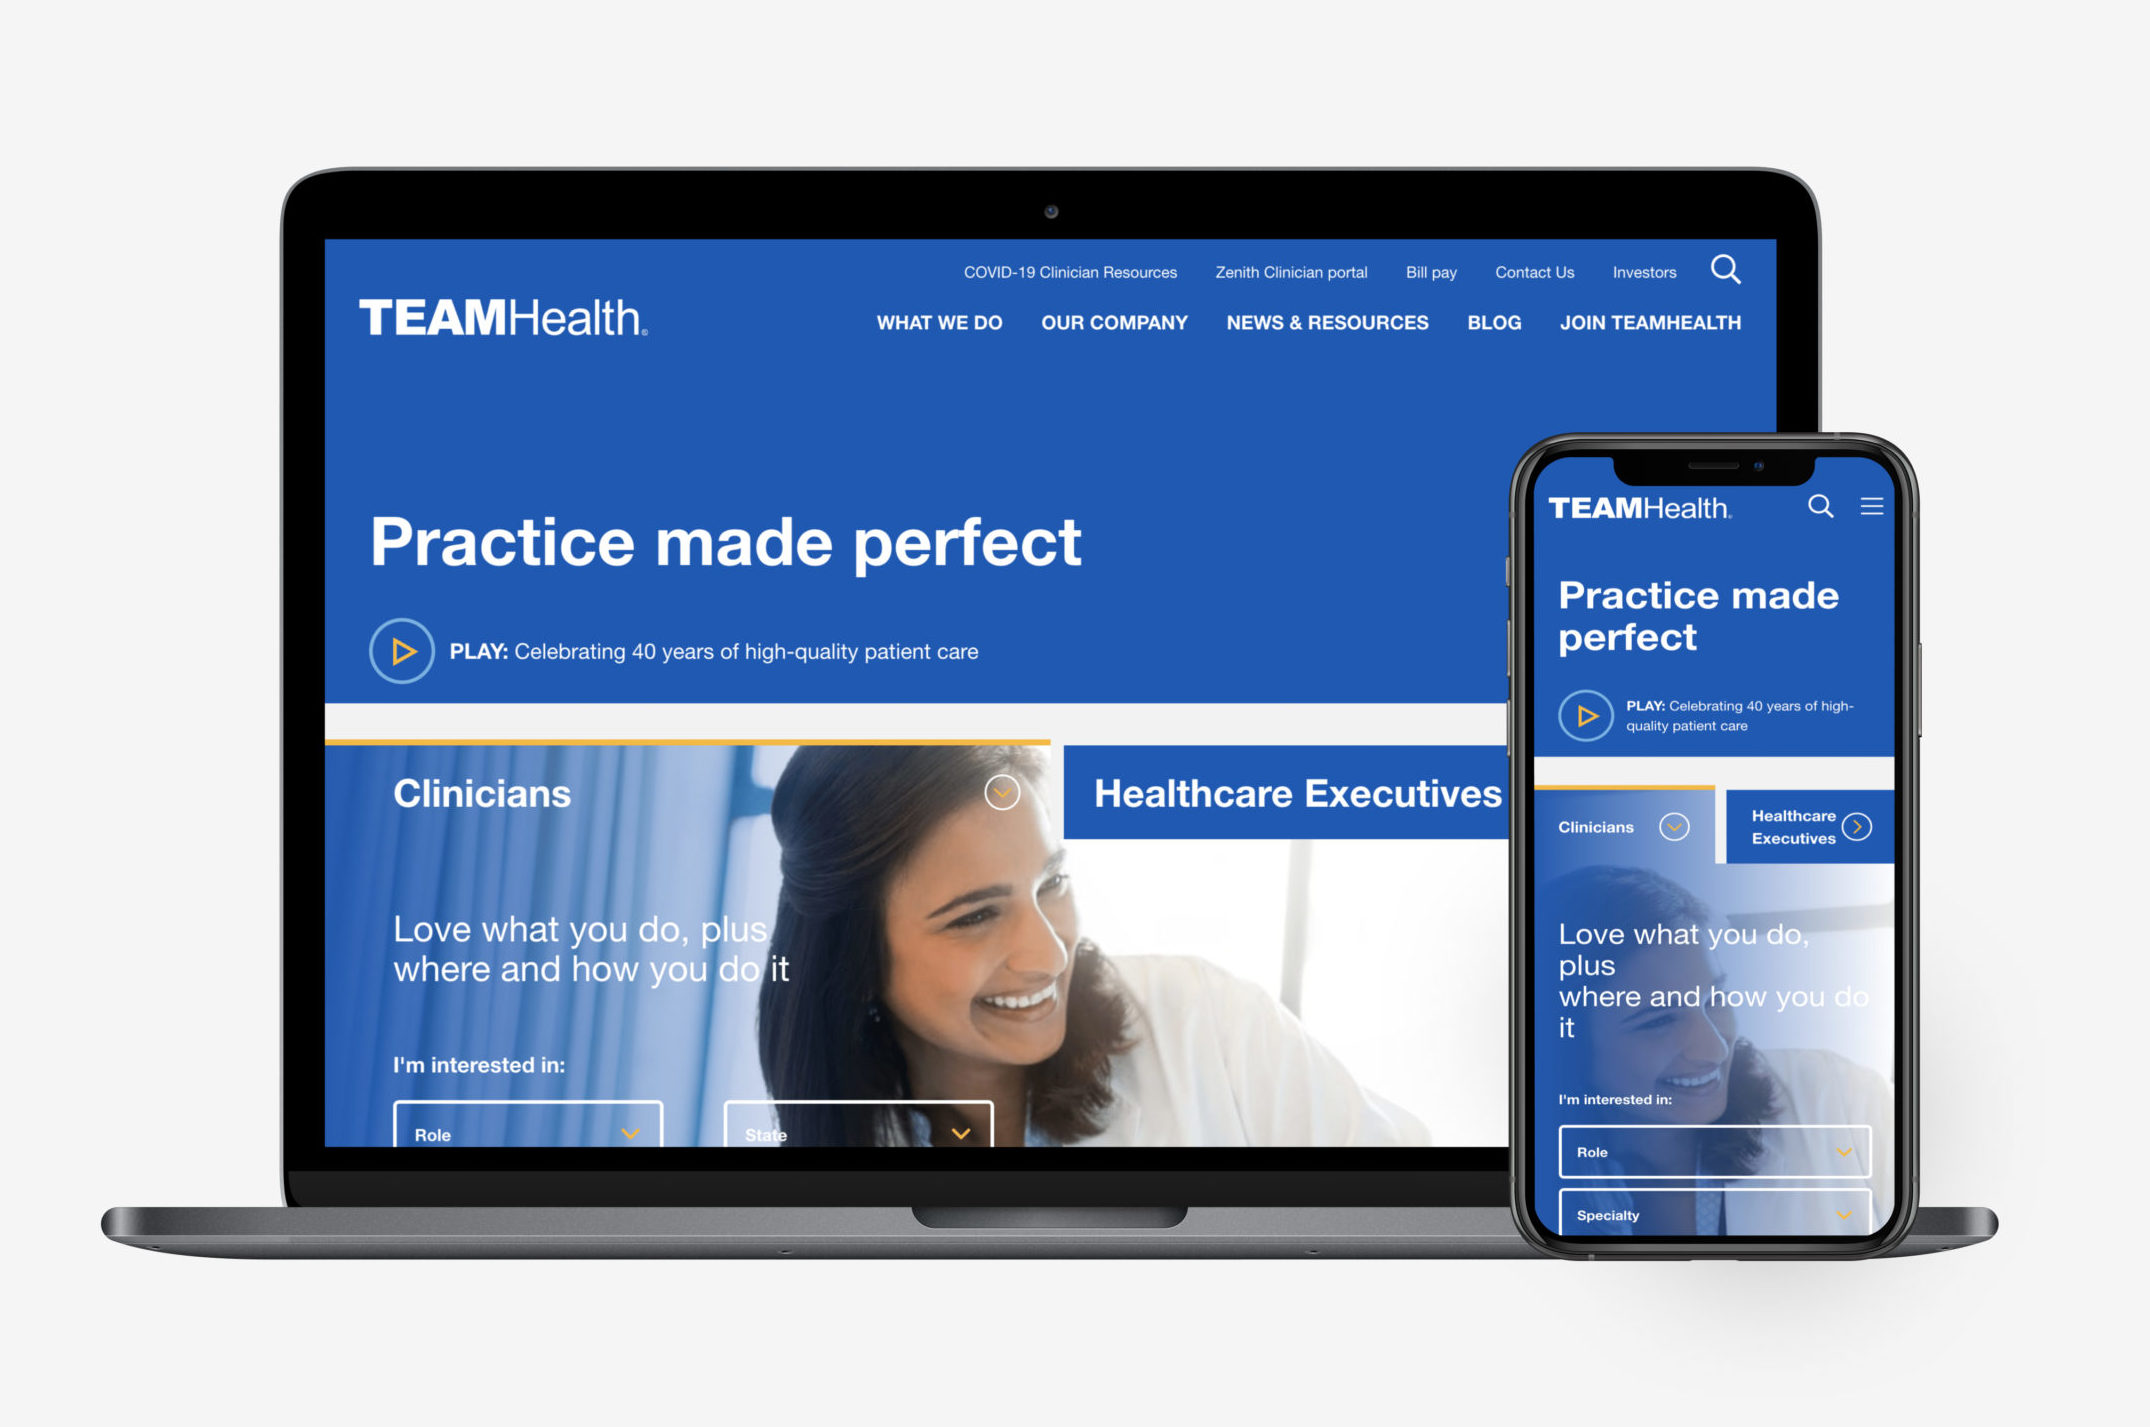 TeamHealth website displayed on laptop and iPhone